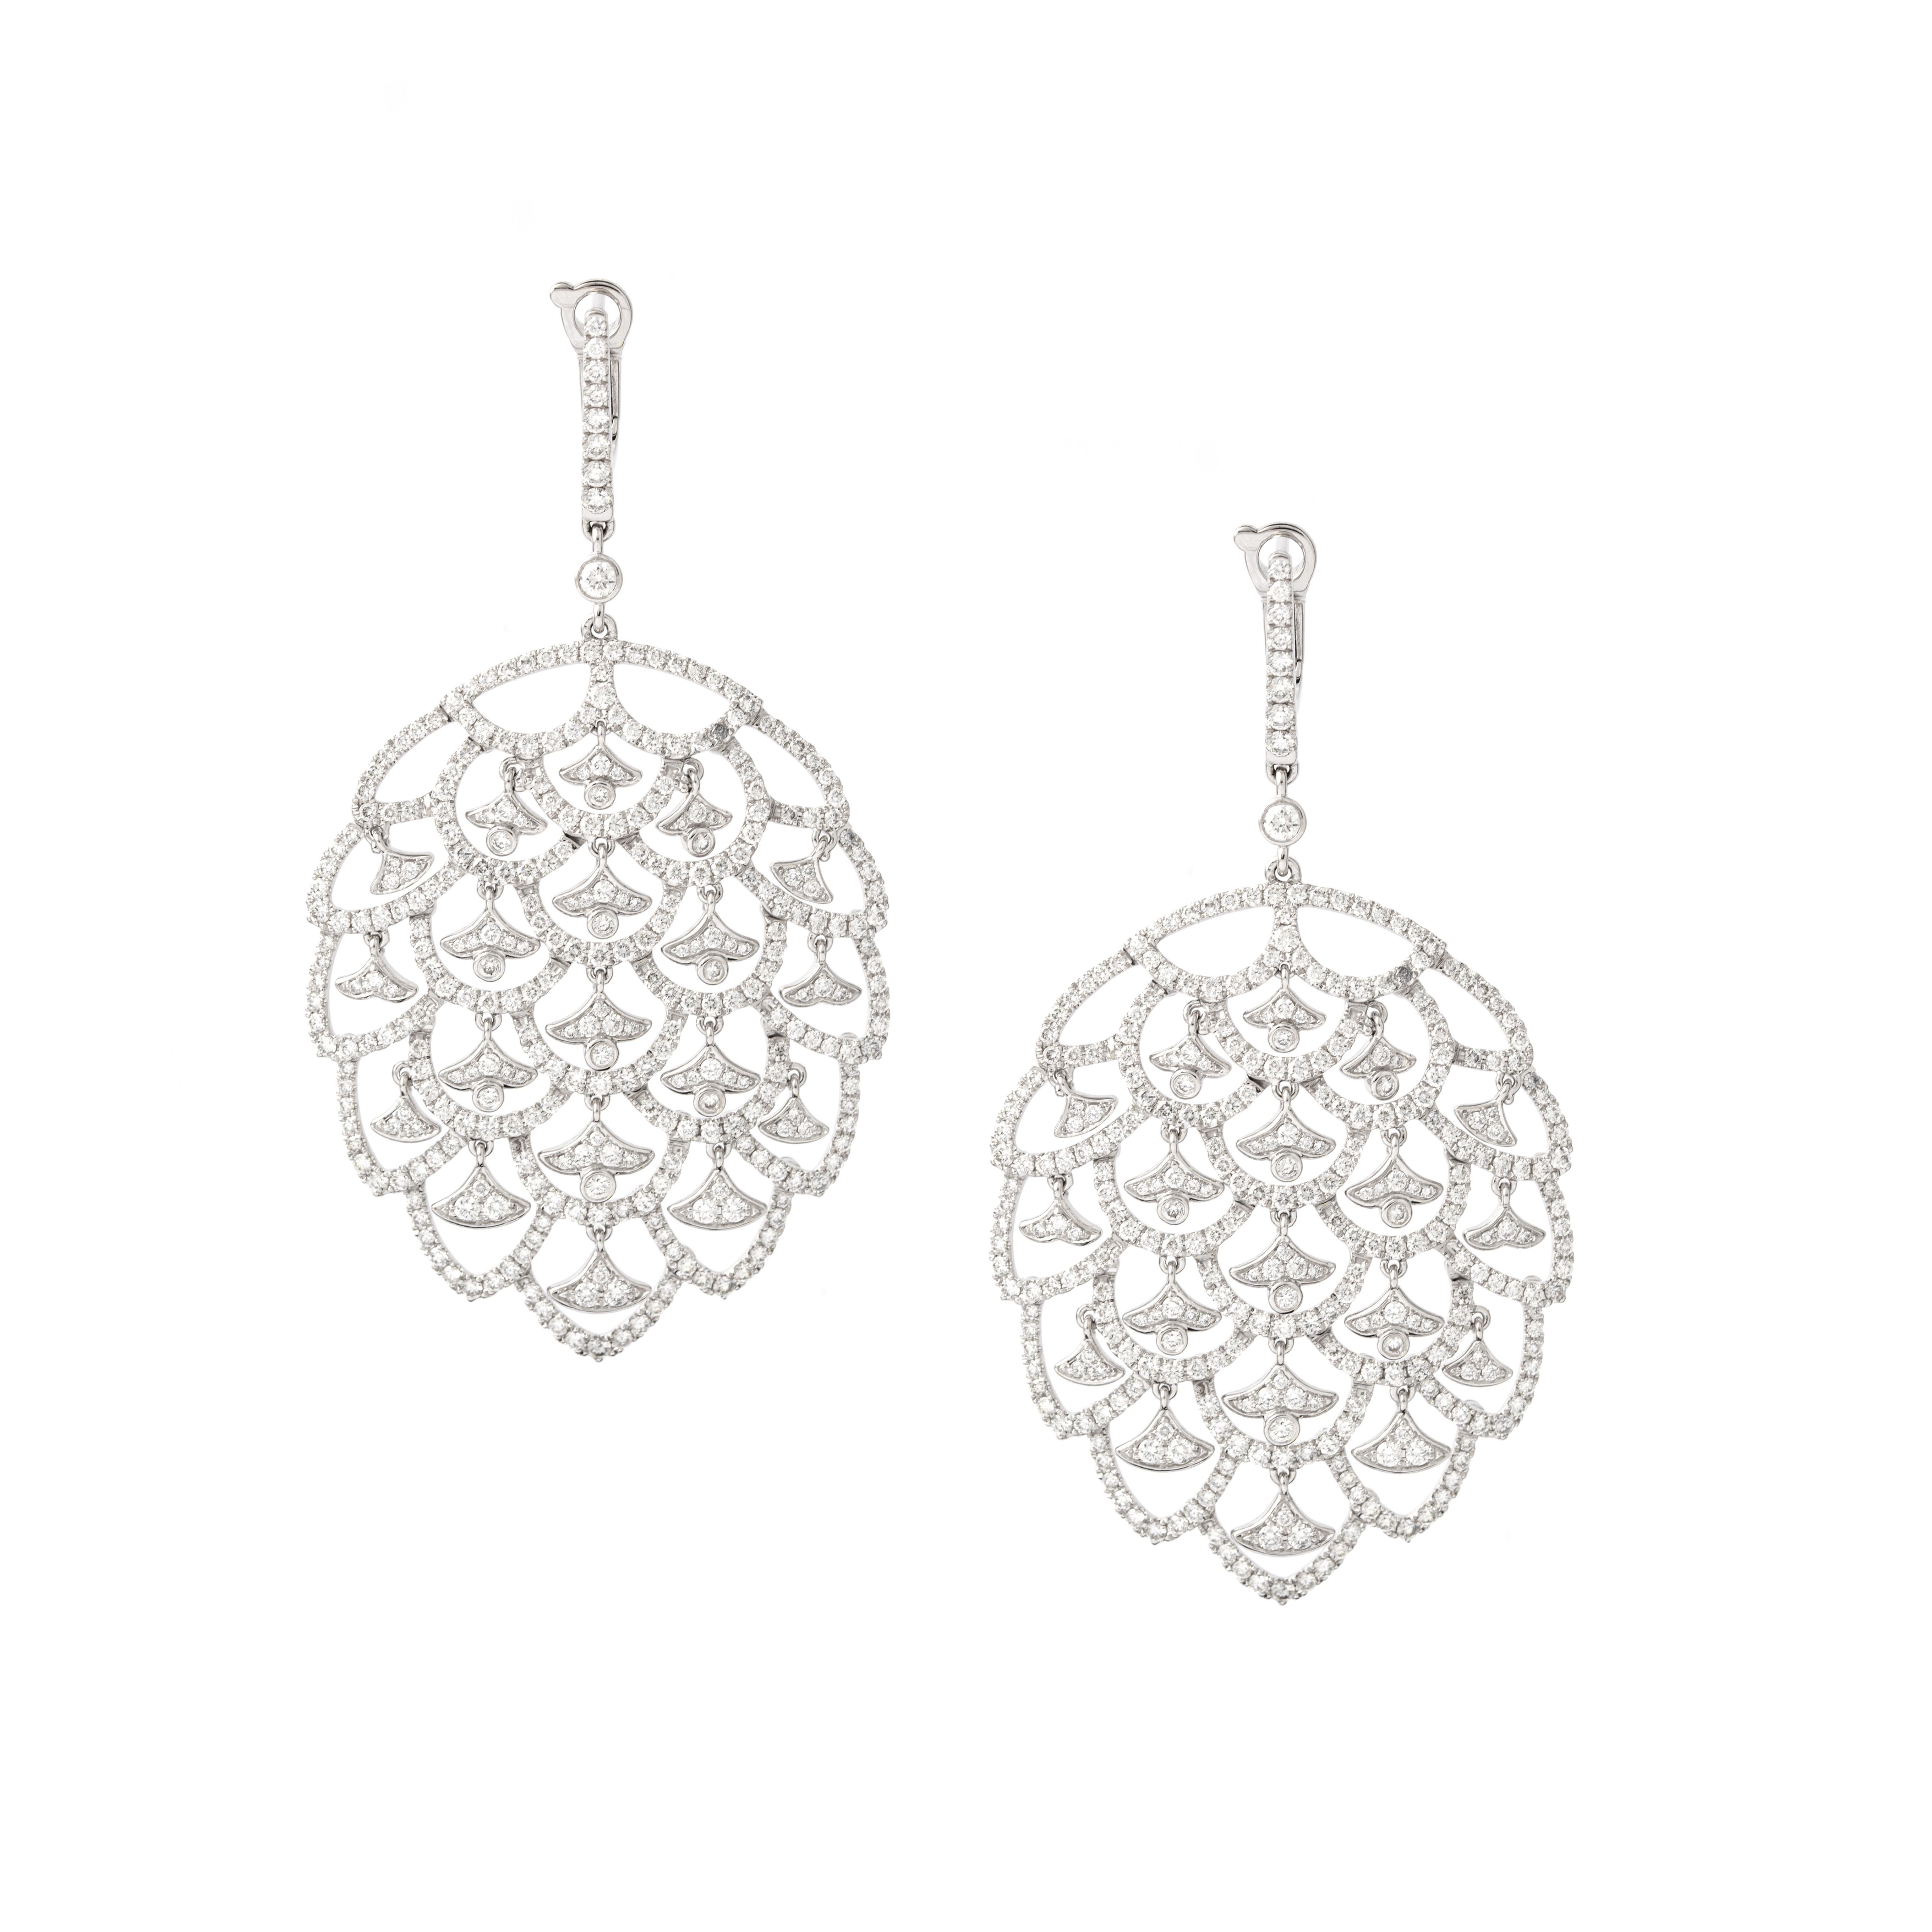 Earrings in 18kt white gold set with 664 diamonds 6.05cts.

Length: 7.00 centimeters (2.76 inches).

Maximum Width : 4.00 centimeters (1.57 inches).

Total weight: 29.12 grams.